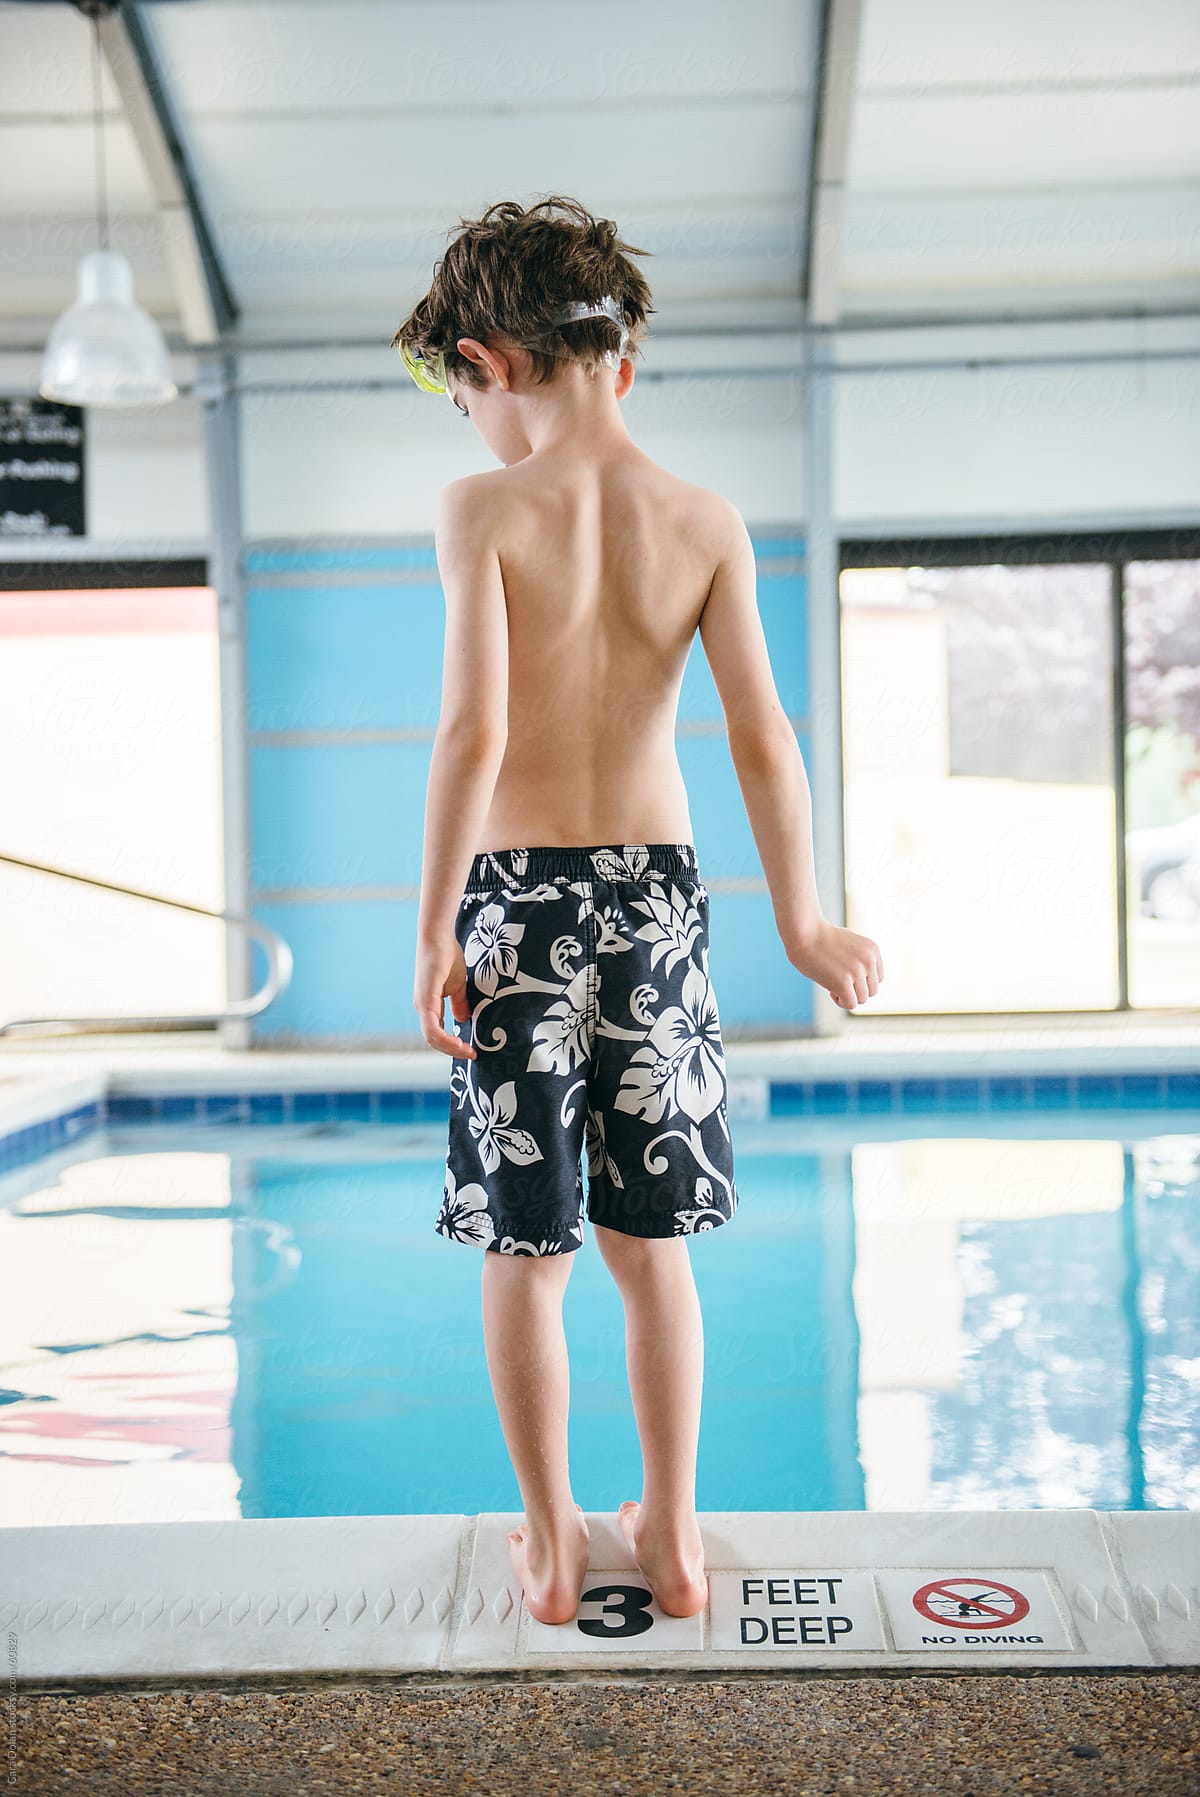 Boy in swimsuit stands at the edge of an indoor swimming pool